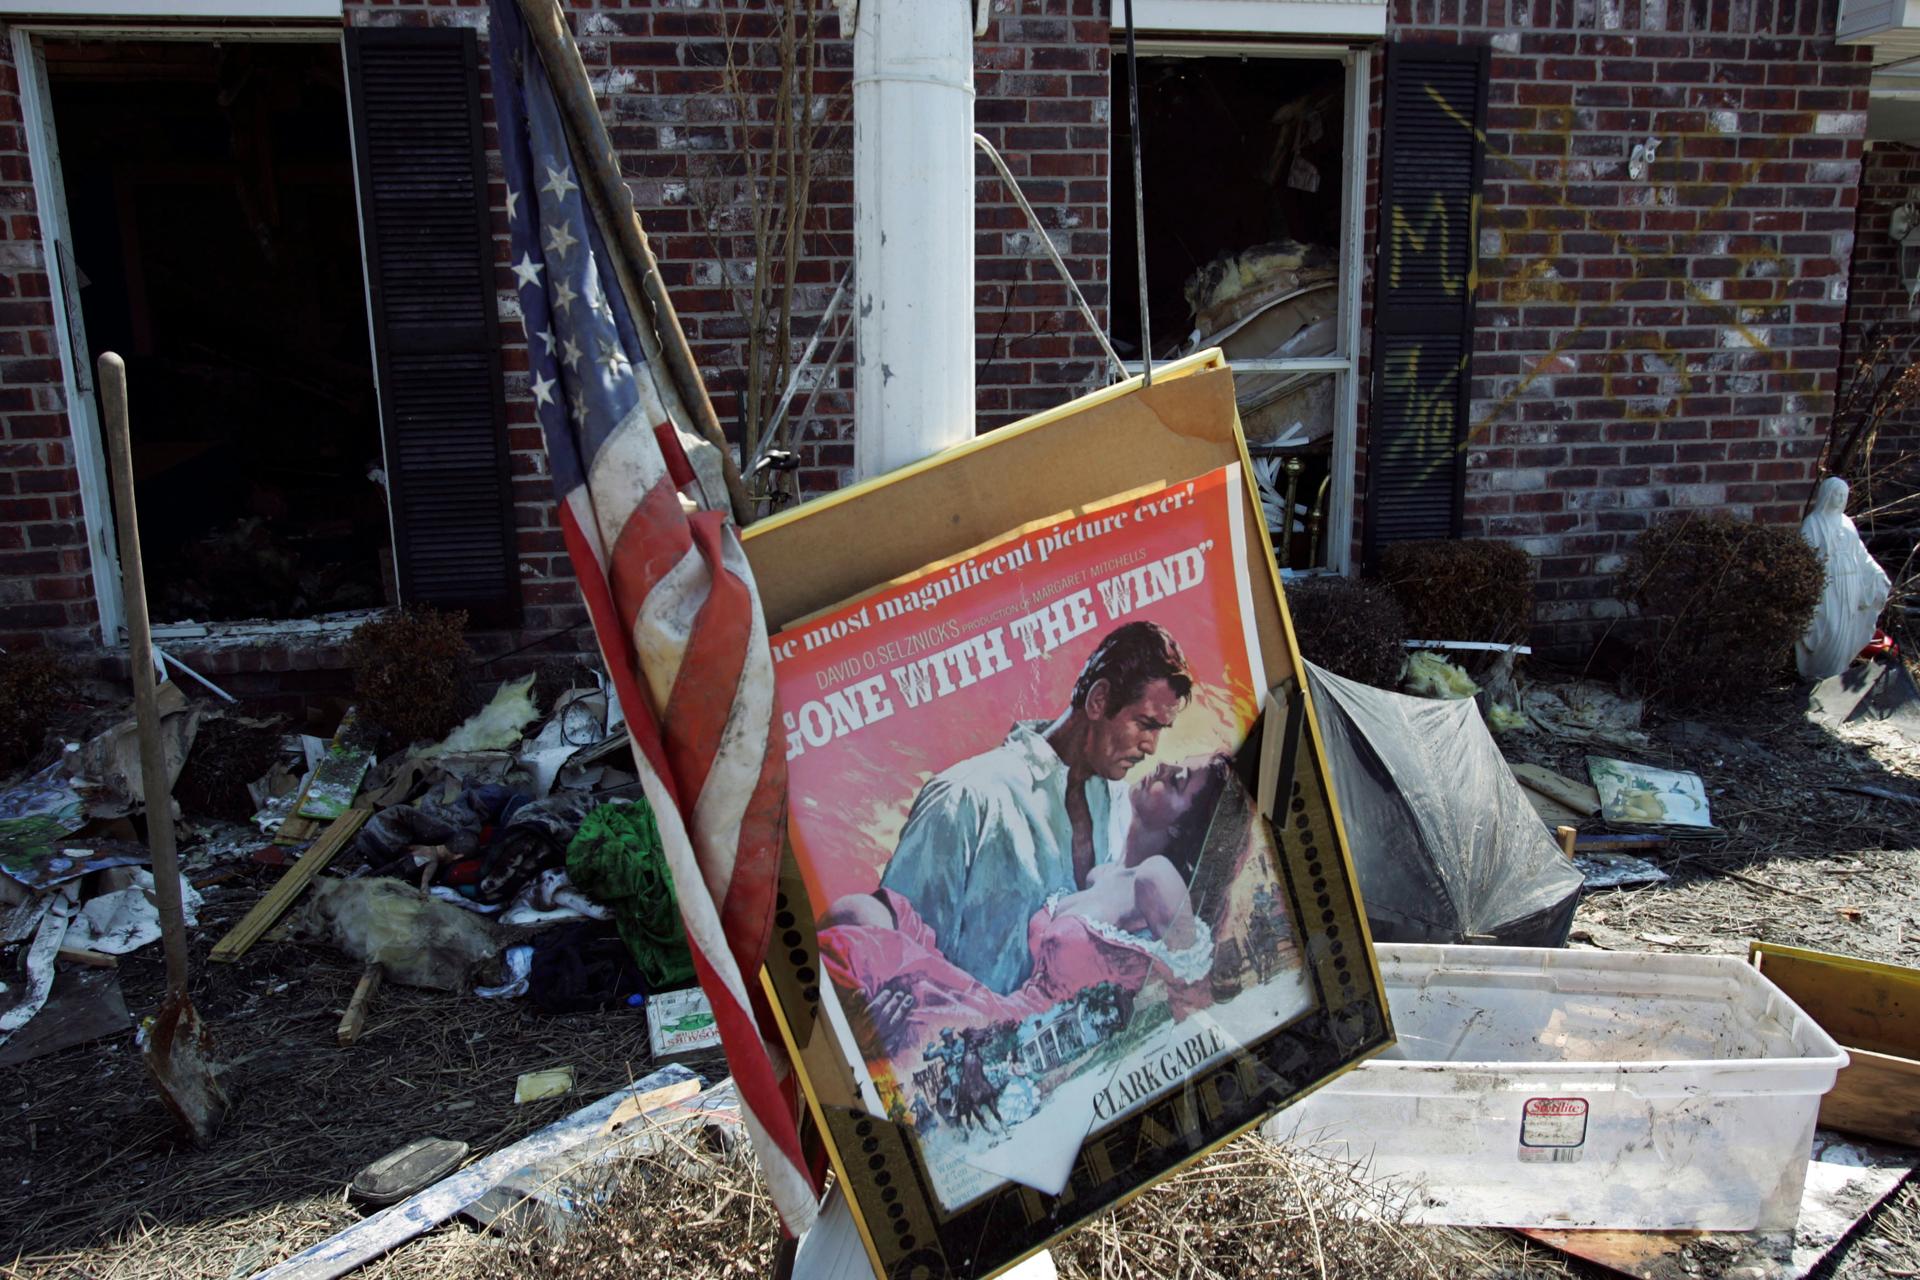 A movie poster for "Gone with the Wind" sits in a front yard of a home damaged by Hurricane Katrina in Chalmette, Louisiana, in St. Bernard Parish September 28, 2005.